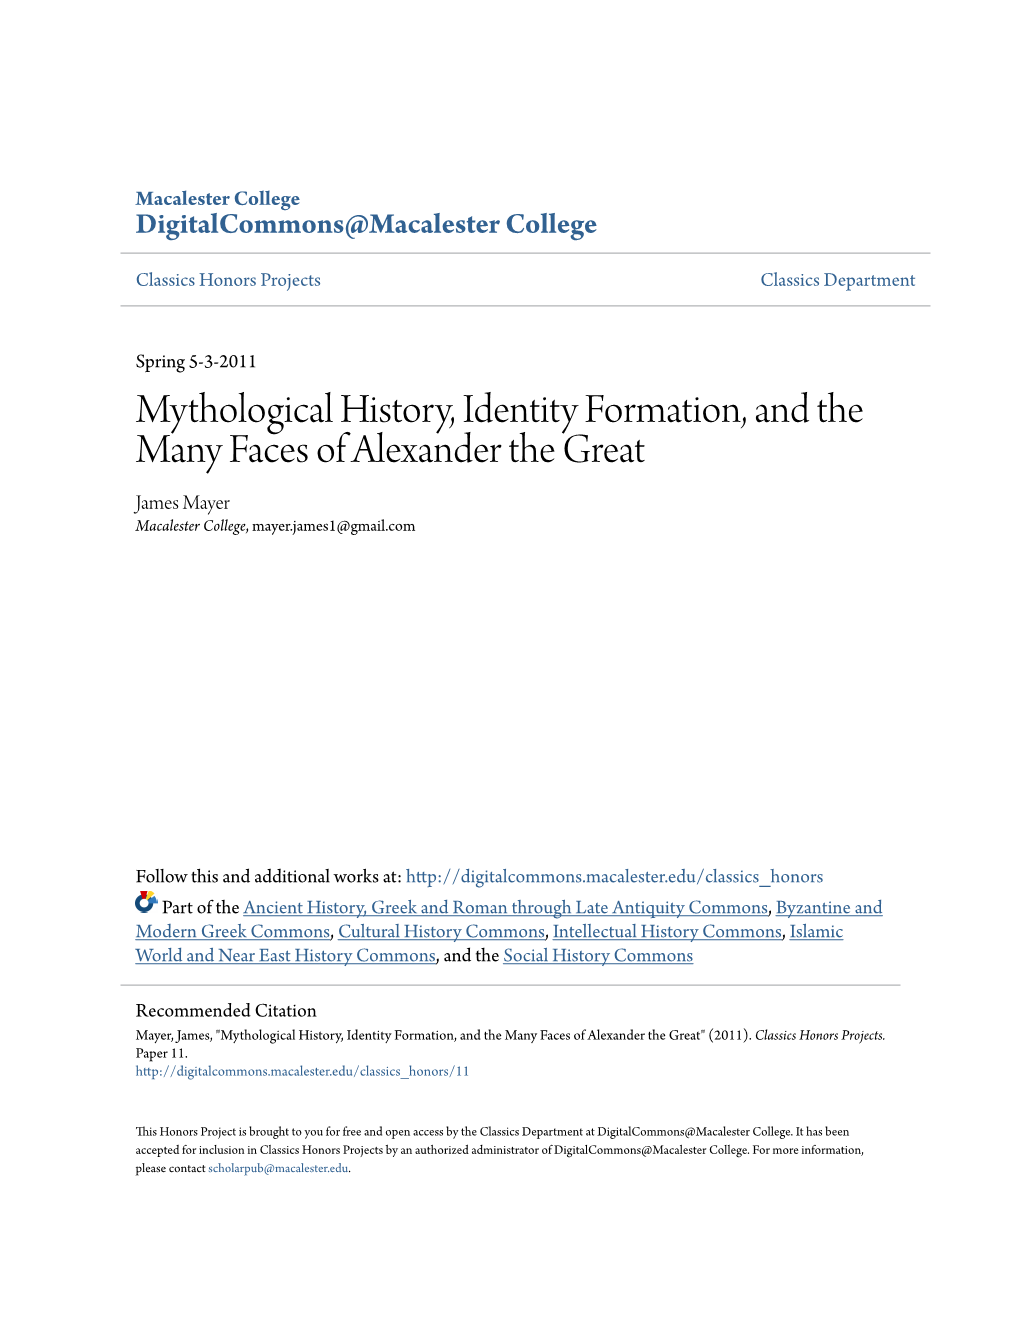 Mythological History, Identity Formation, and the Many Faces of Alexander the Great James Mayer Macalester College, Mayer.James1@Gmail.Com